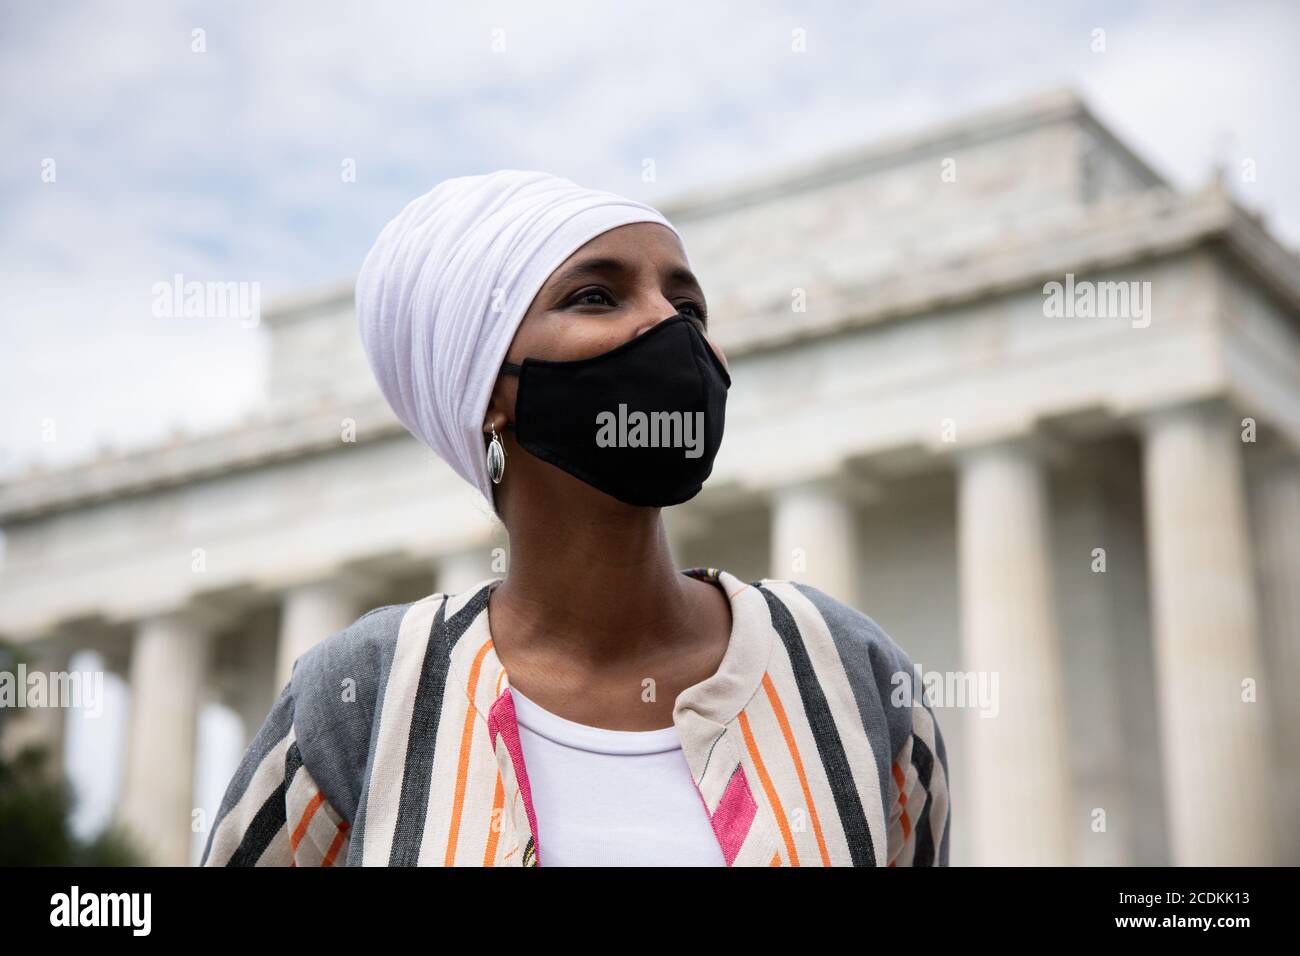 Representative Ilhan Omar (D-MN) stands in front of the Lincoln Memorial on the National Mall during the civil rights march organized by Al Sharpton calling attention to systemic racism and police violence after the May police killing of George Floyd in Minnesota, in Washington, DC, on August 28, 2020, amid the coronavirus pandemic. The night before The Commitment March: Get Your Knee Off Our Necks, protests consumed the blocks surrounding the White House, as President Trump gave his presidential nomination acceptance speech with sounds from noisy demonstrations in the background. (Graeme Sl Stock Photo